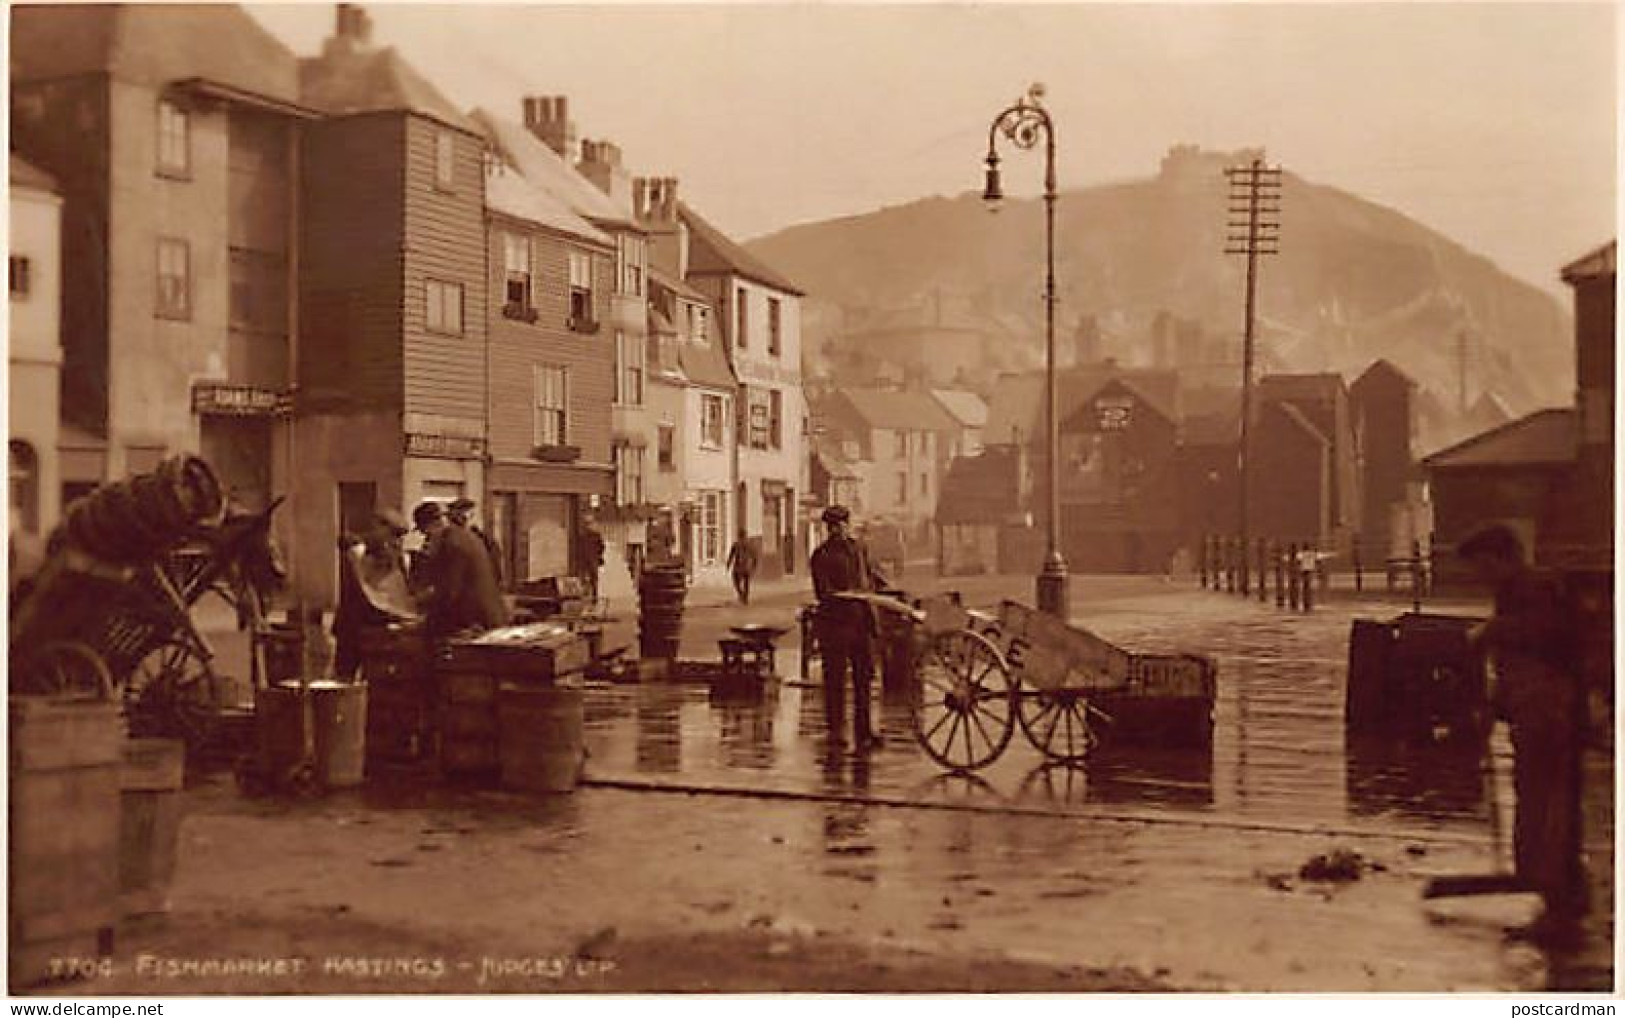 England - HASTINGS (Sx) Fish Market - REAL PHOTO - Publ. Judges 7704 - Hastings